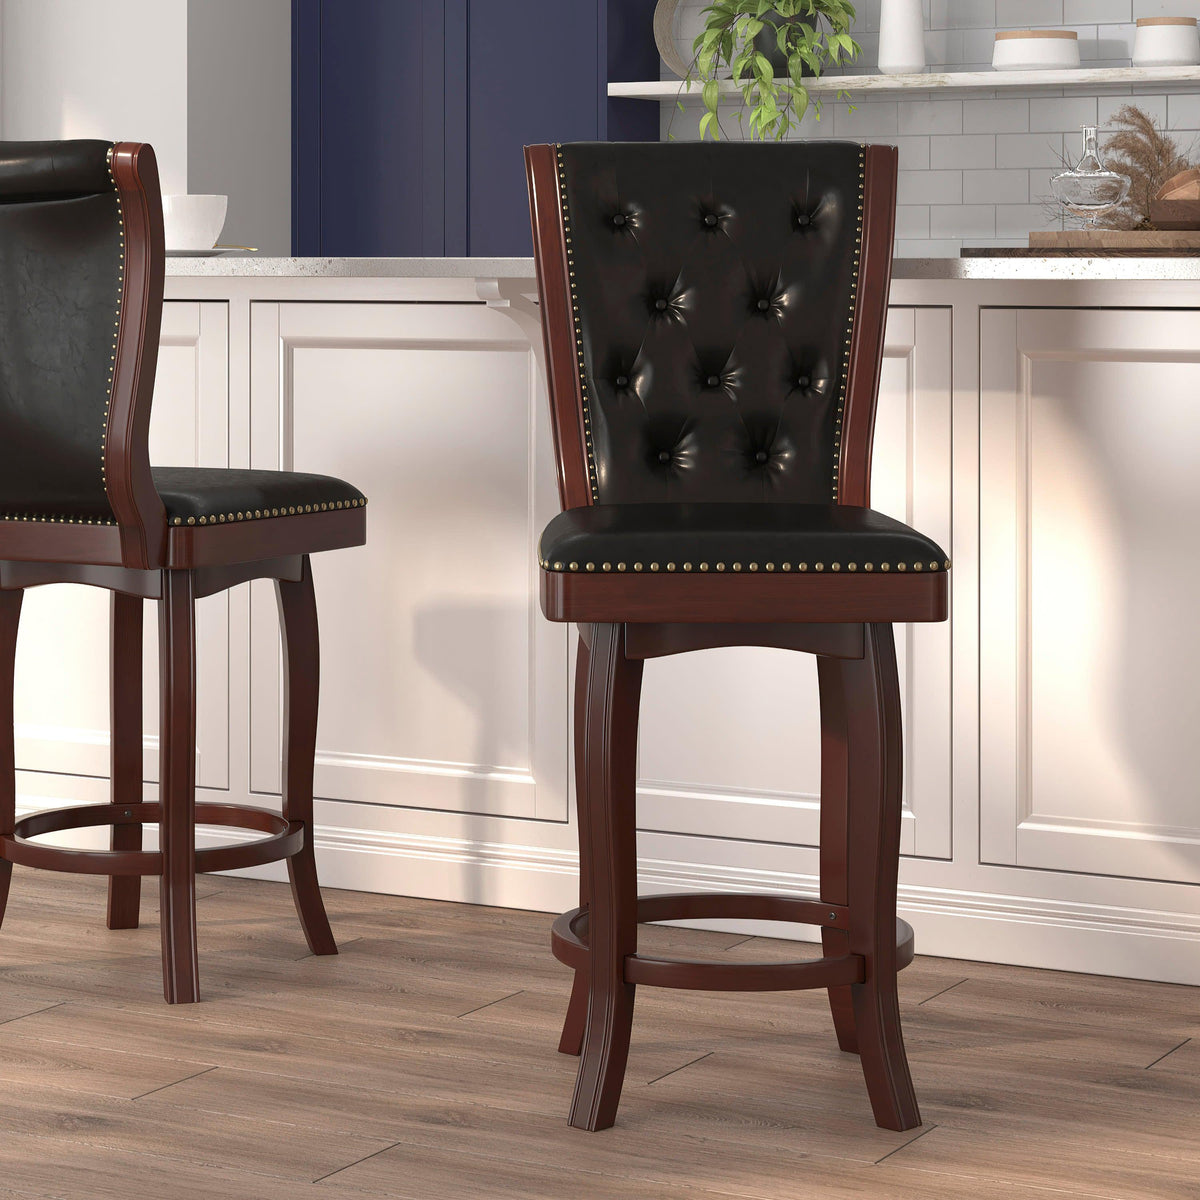 Cappuccino |#| 30inch High Cappuccino Wood Barstool w/Tufted Back & Black LeatherSoft Swivel Seat